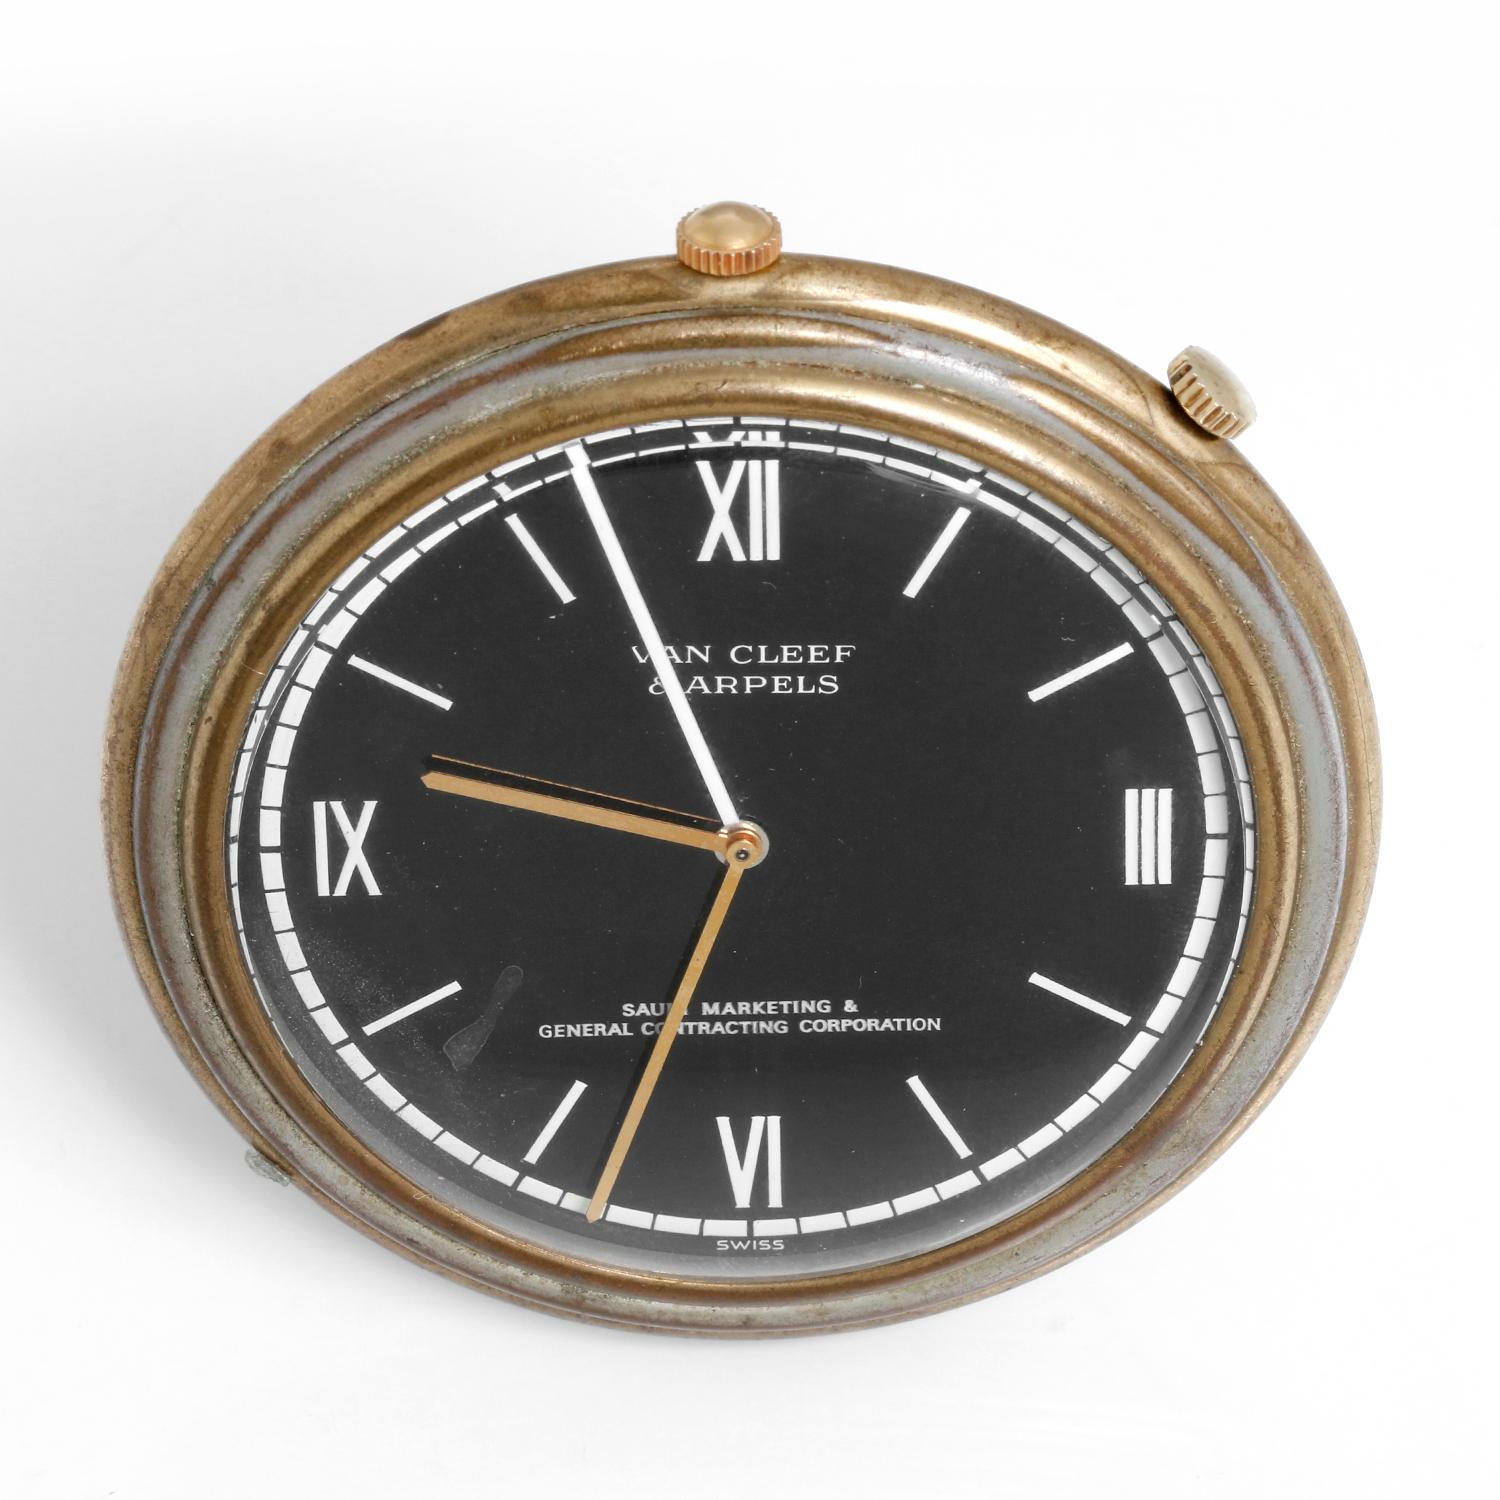 Vintage Van Cleef & Arpels Desktop Alarm Clock - Manual winding; movement by Gerald Genta. Brass case ( 69 mm ). Black dial with white roman numerals signed Saudi Marketing & General Contracting Corporation. Pre-owned with custom pouch . 